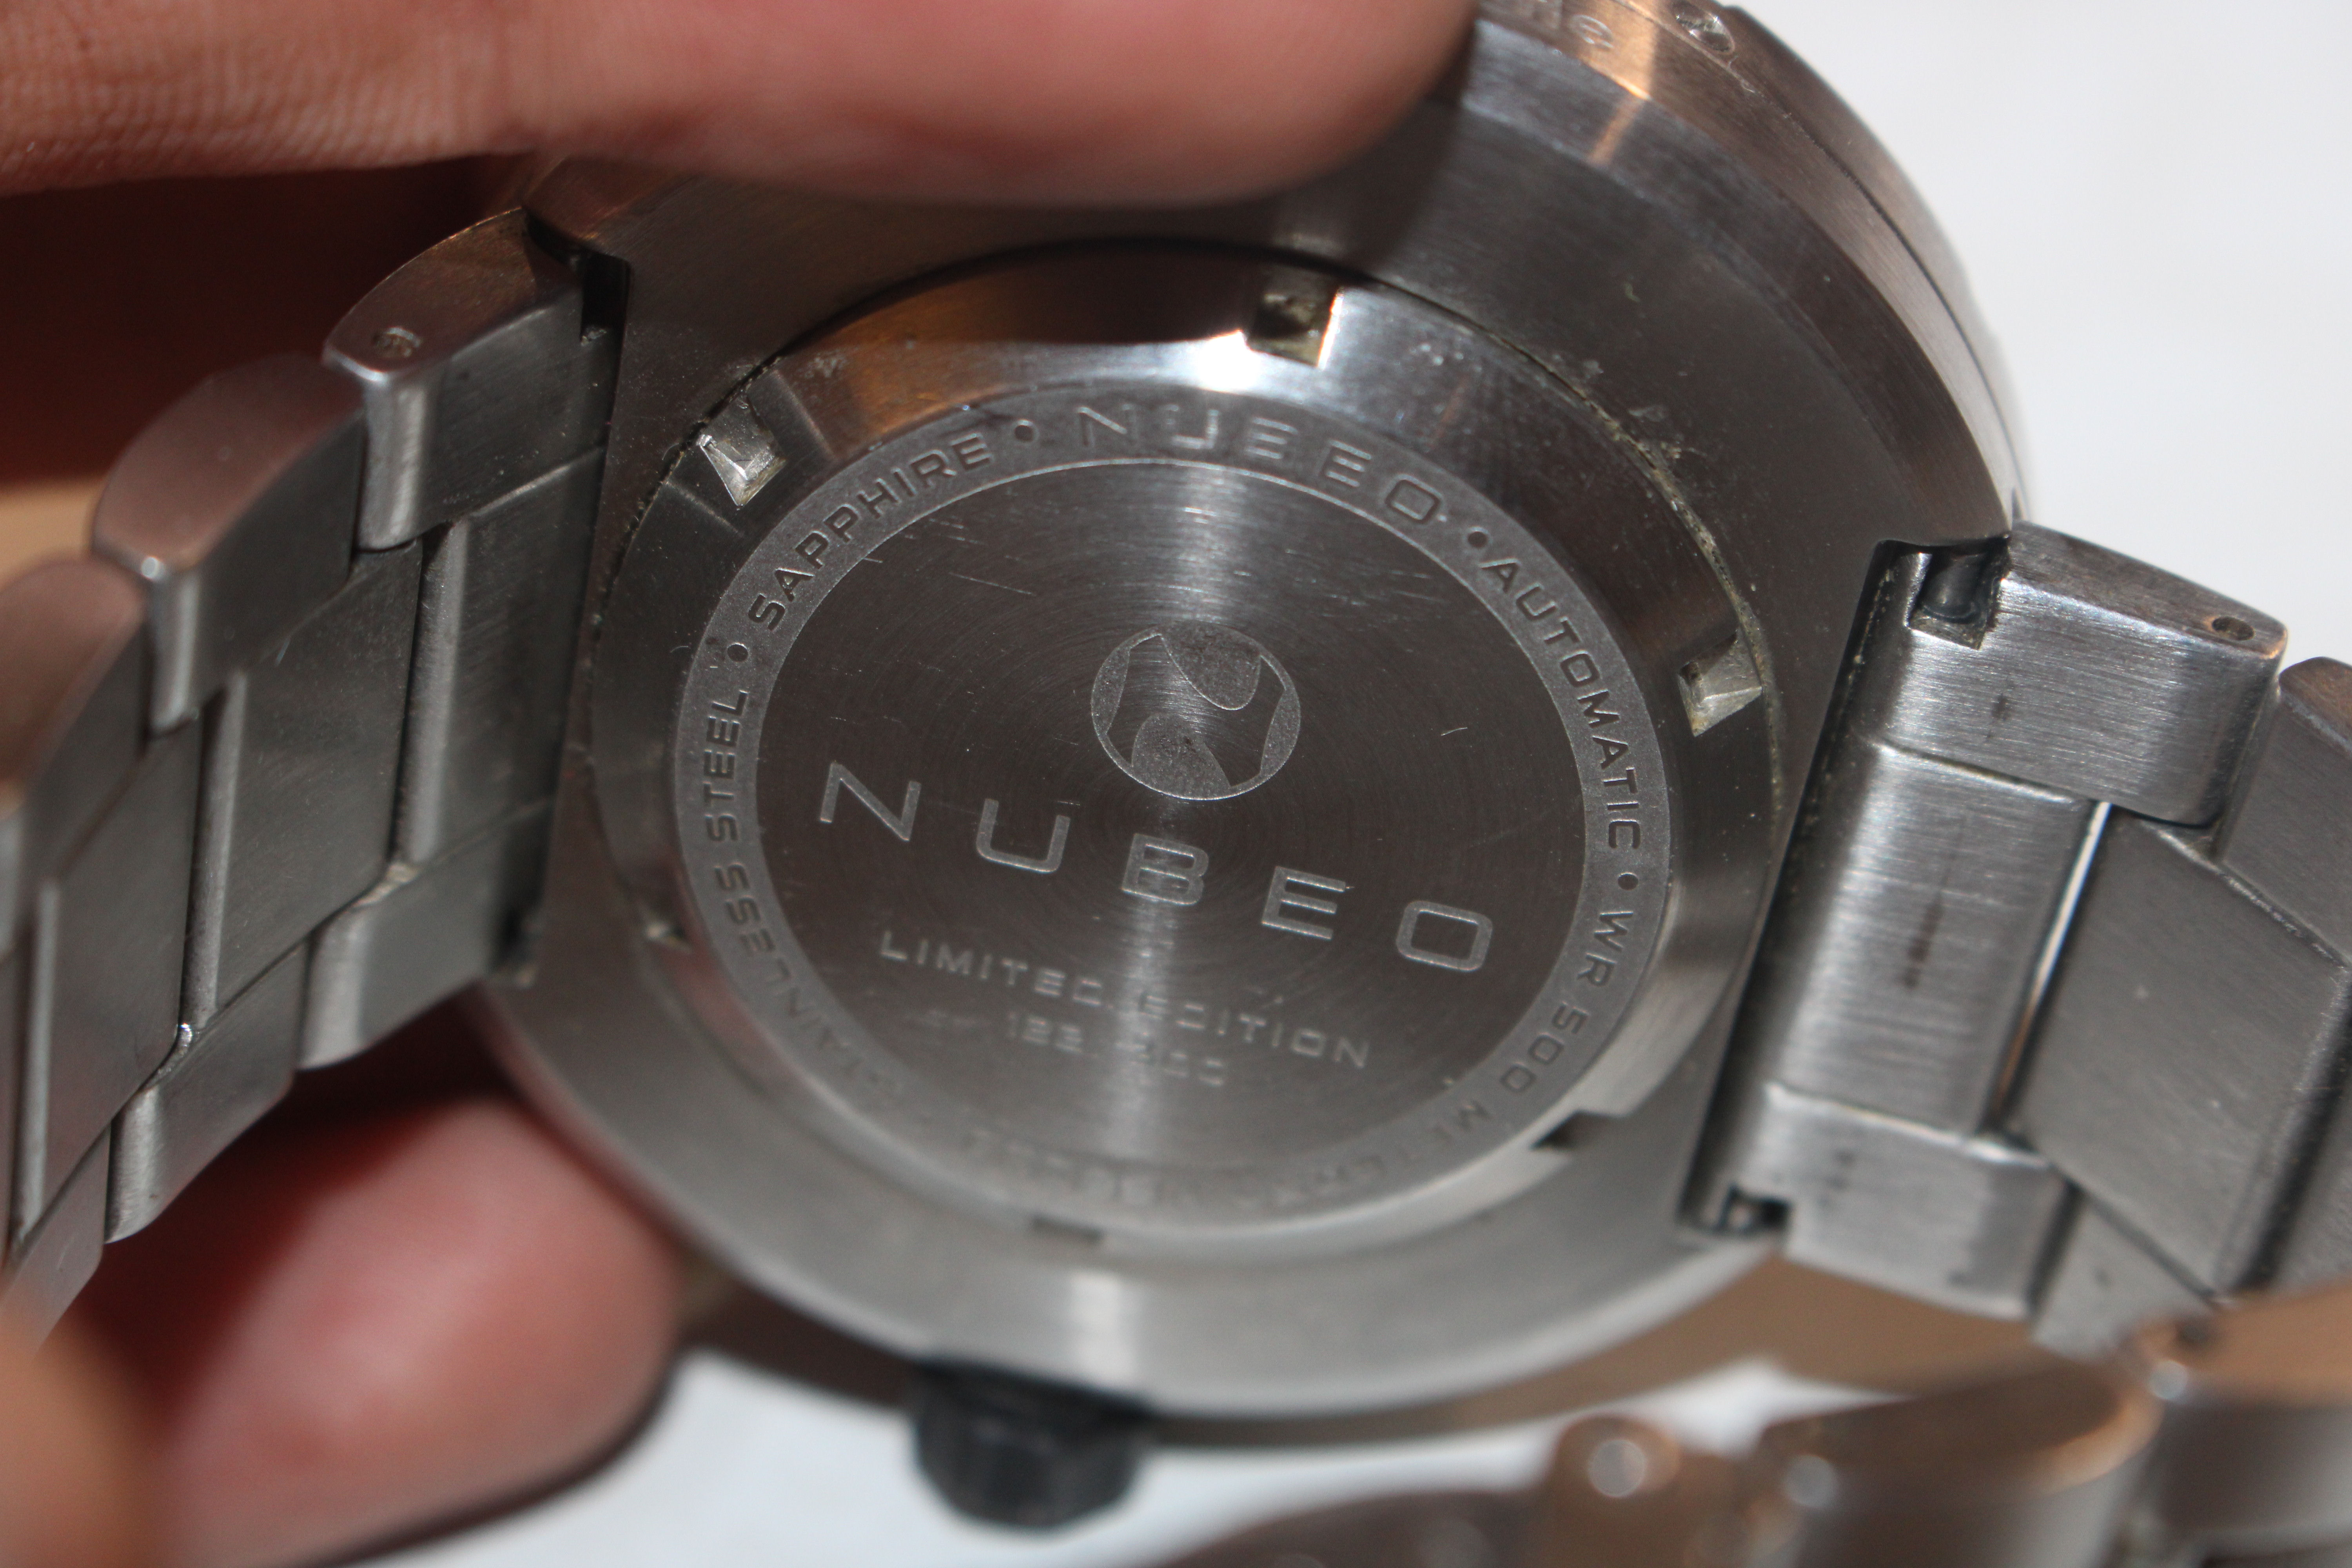 A Nubeo Automatic wrist watch limited edition No.12 - Image 4 of 5